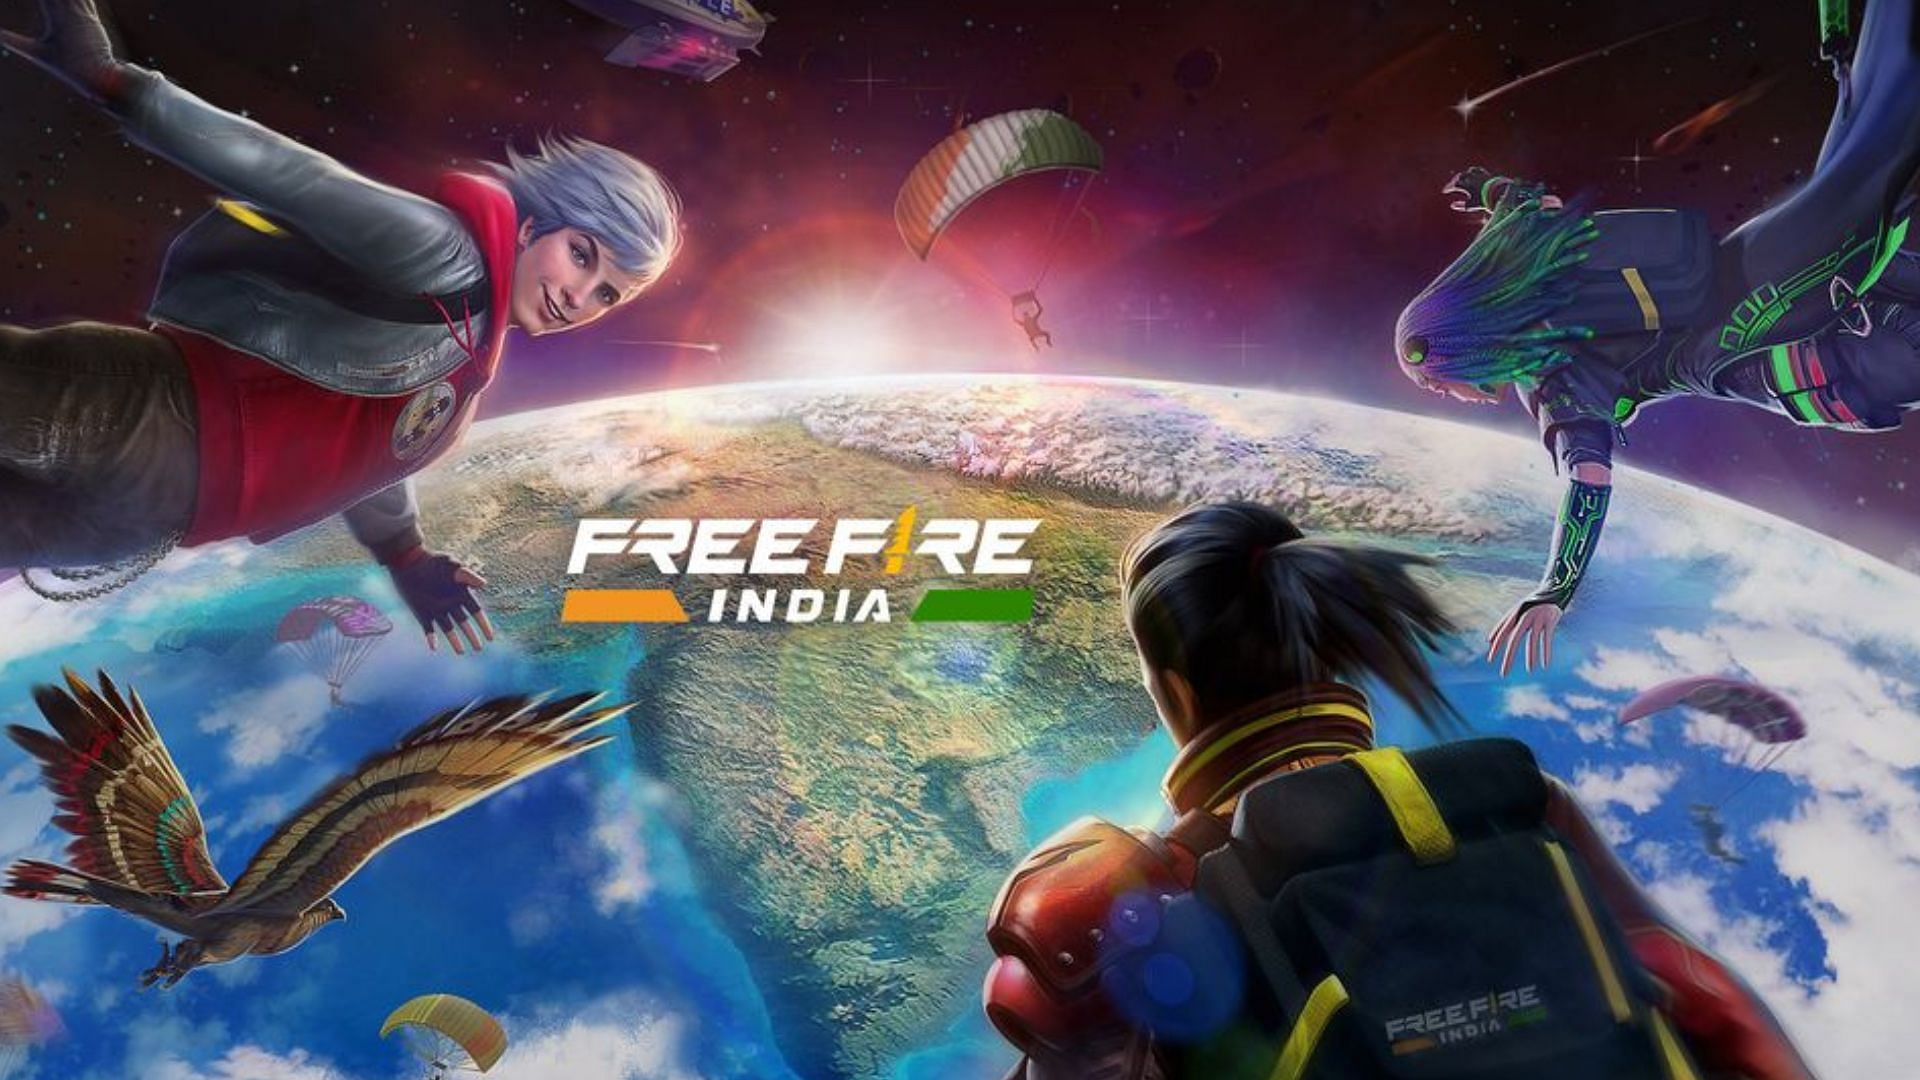 Free Fire gamers will have to wait a little more for the game